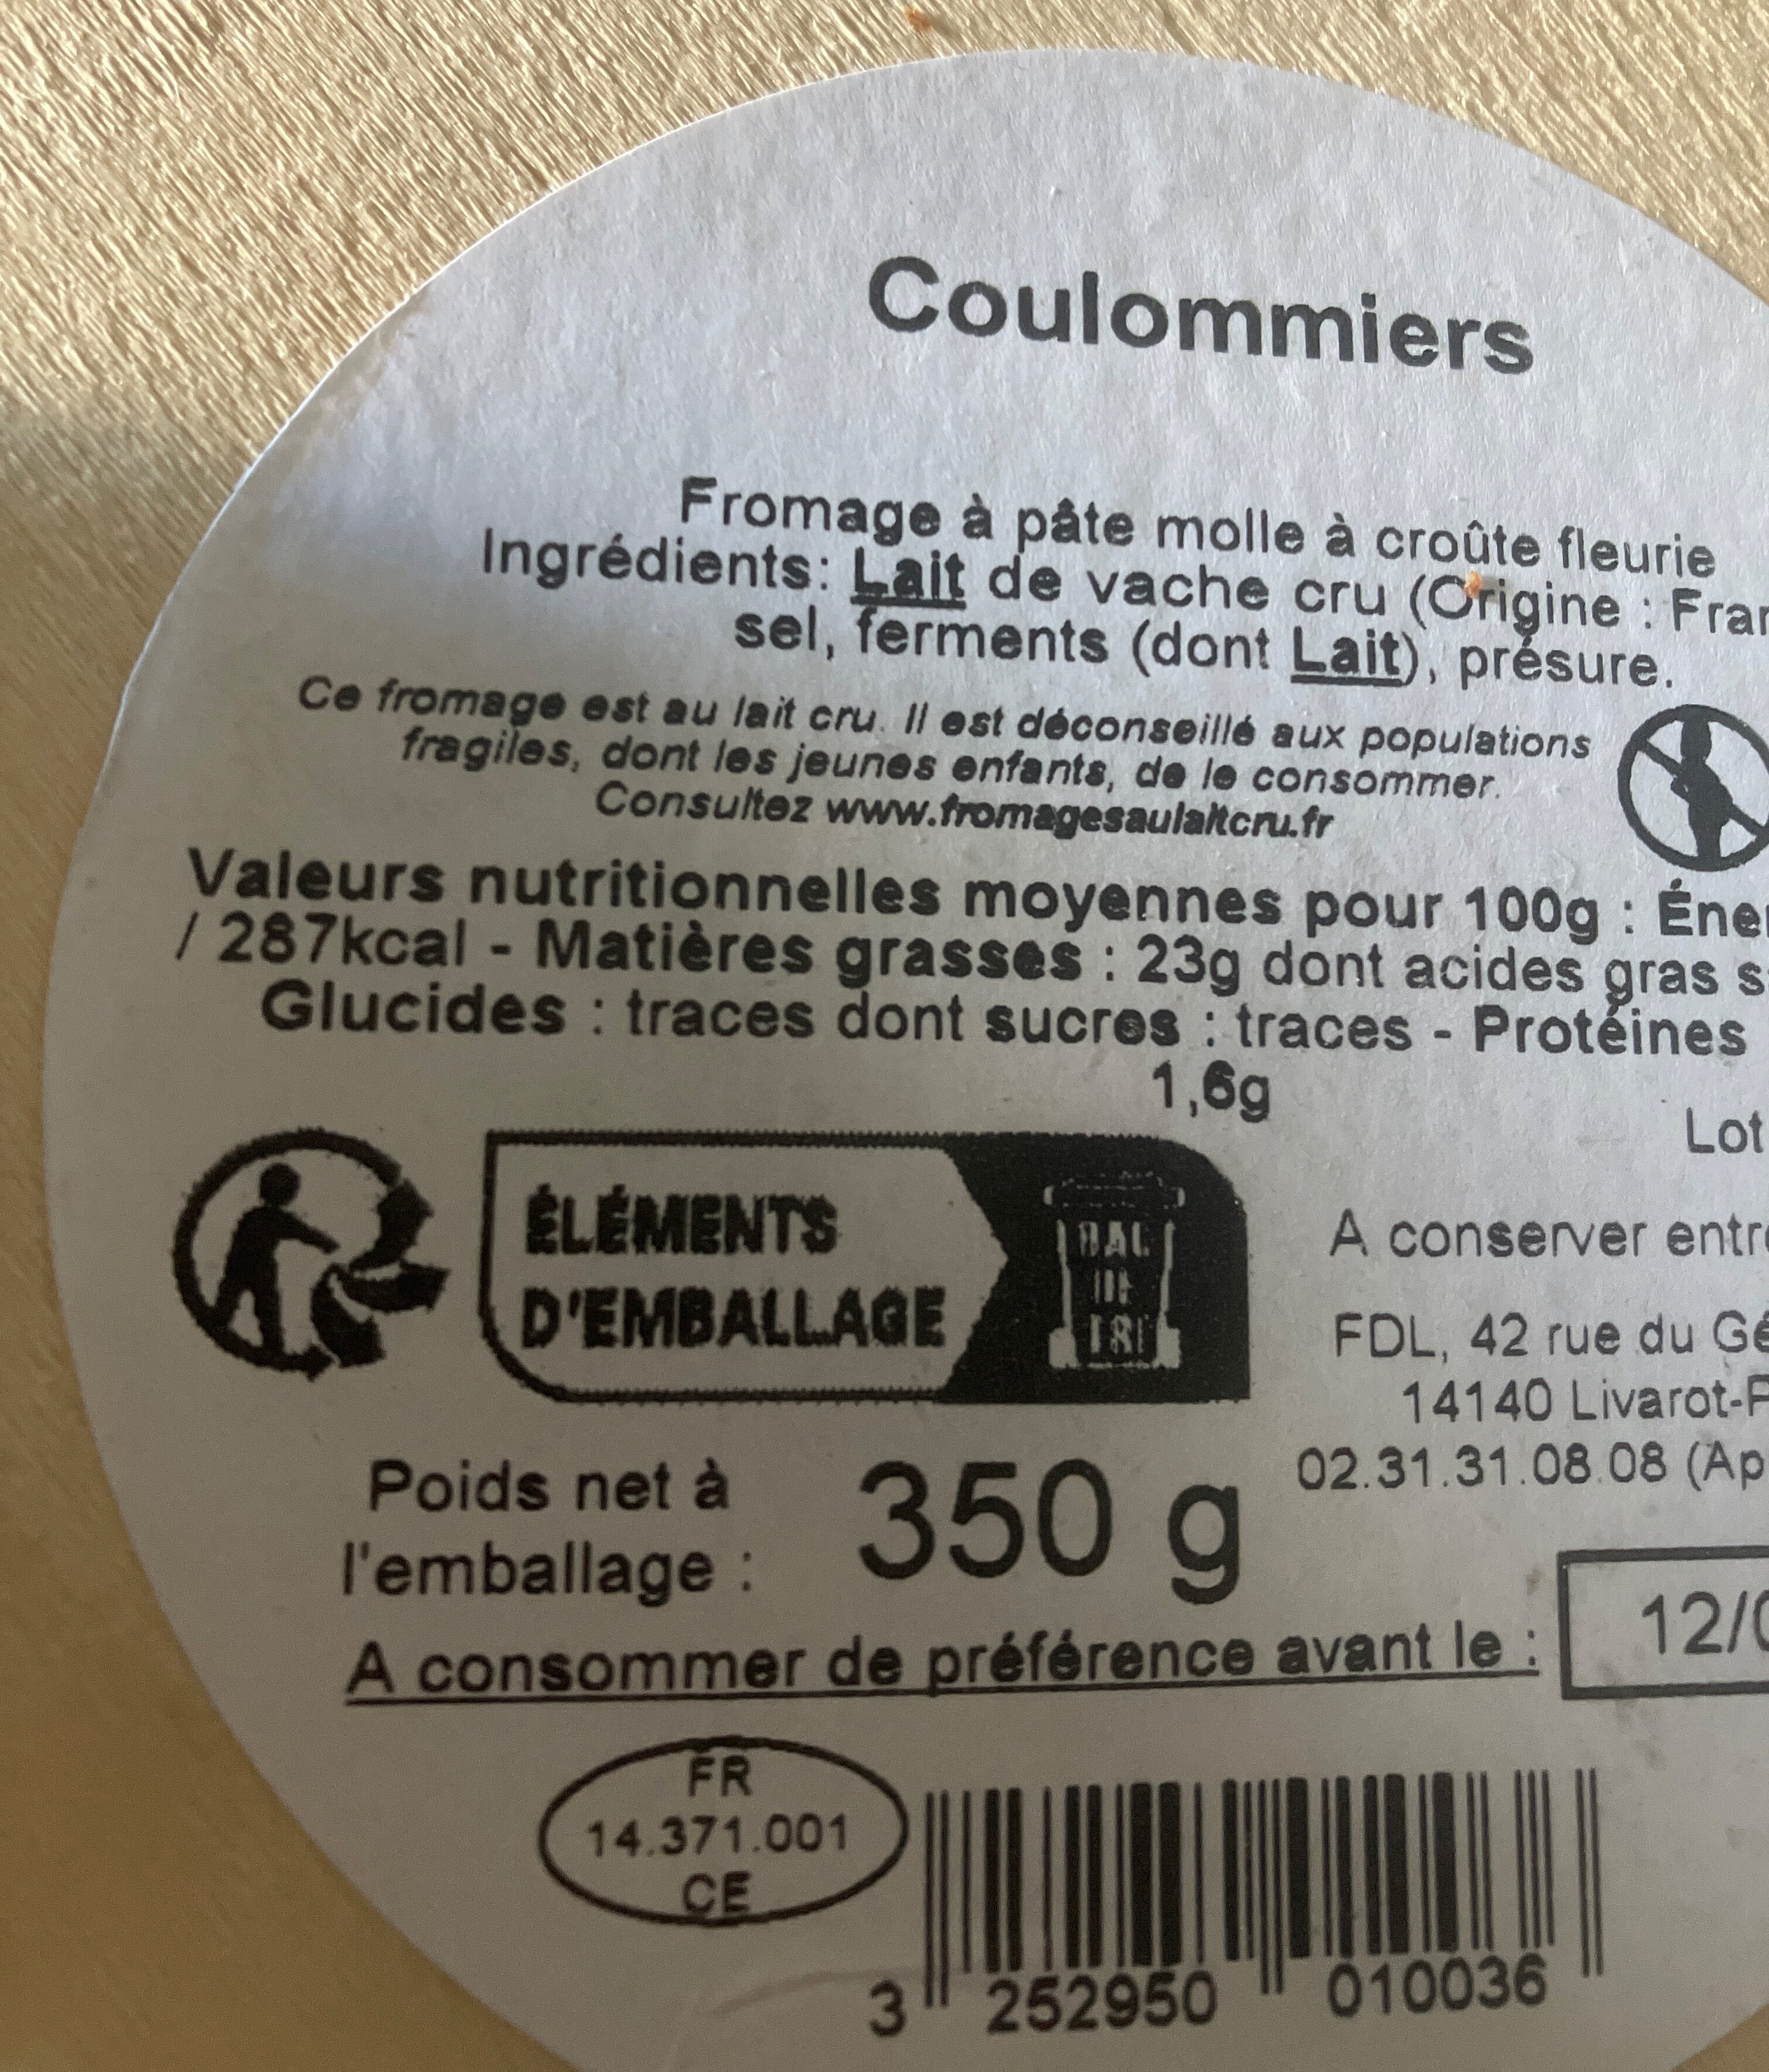 Coulommiers au Lait Cru (23 % MG) - Recycling instructions and/or packaging information